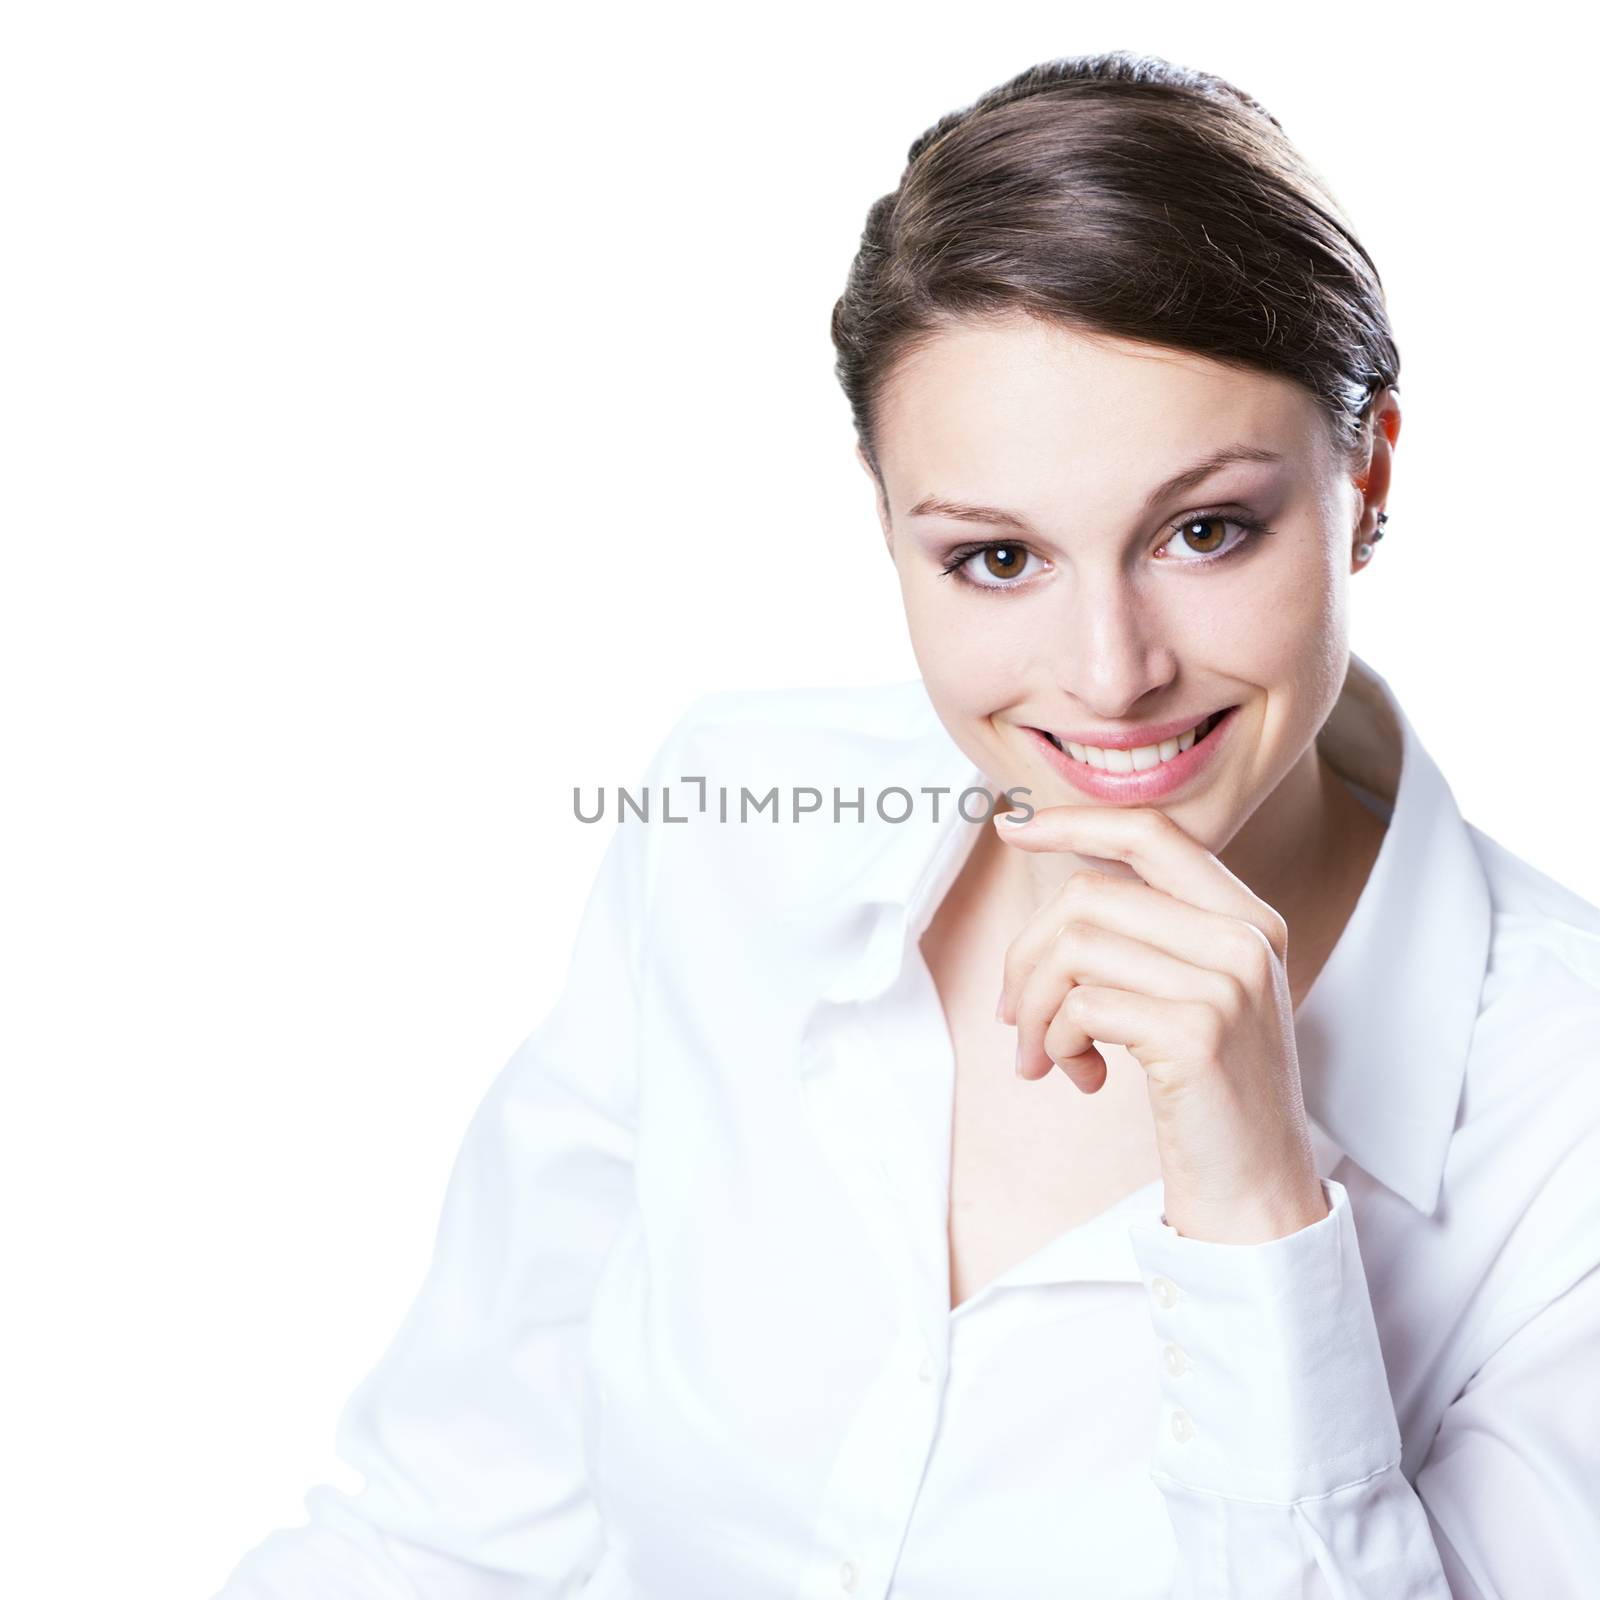 Confident young woman in white shirt with hand on chin smiling at camera.